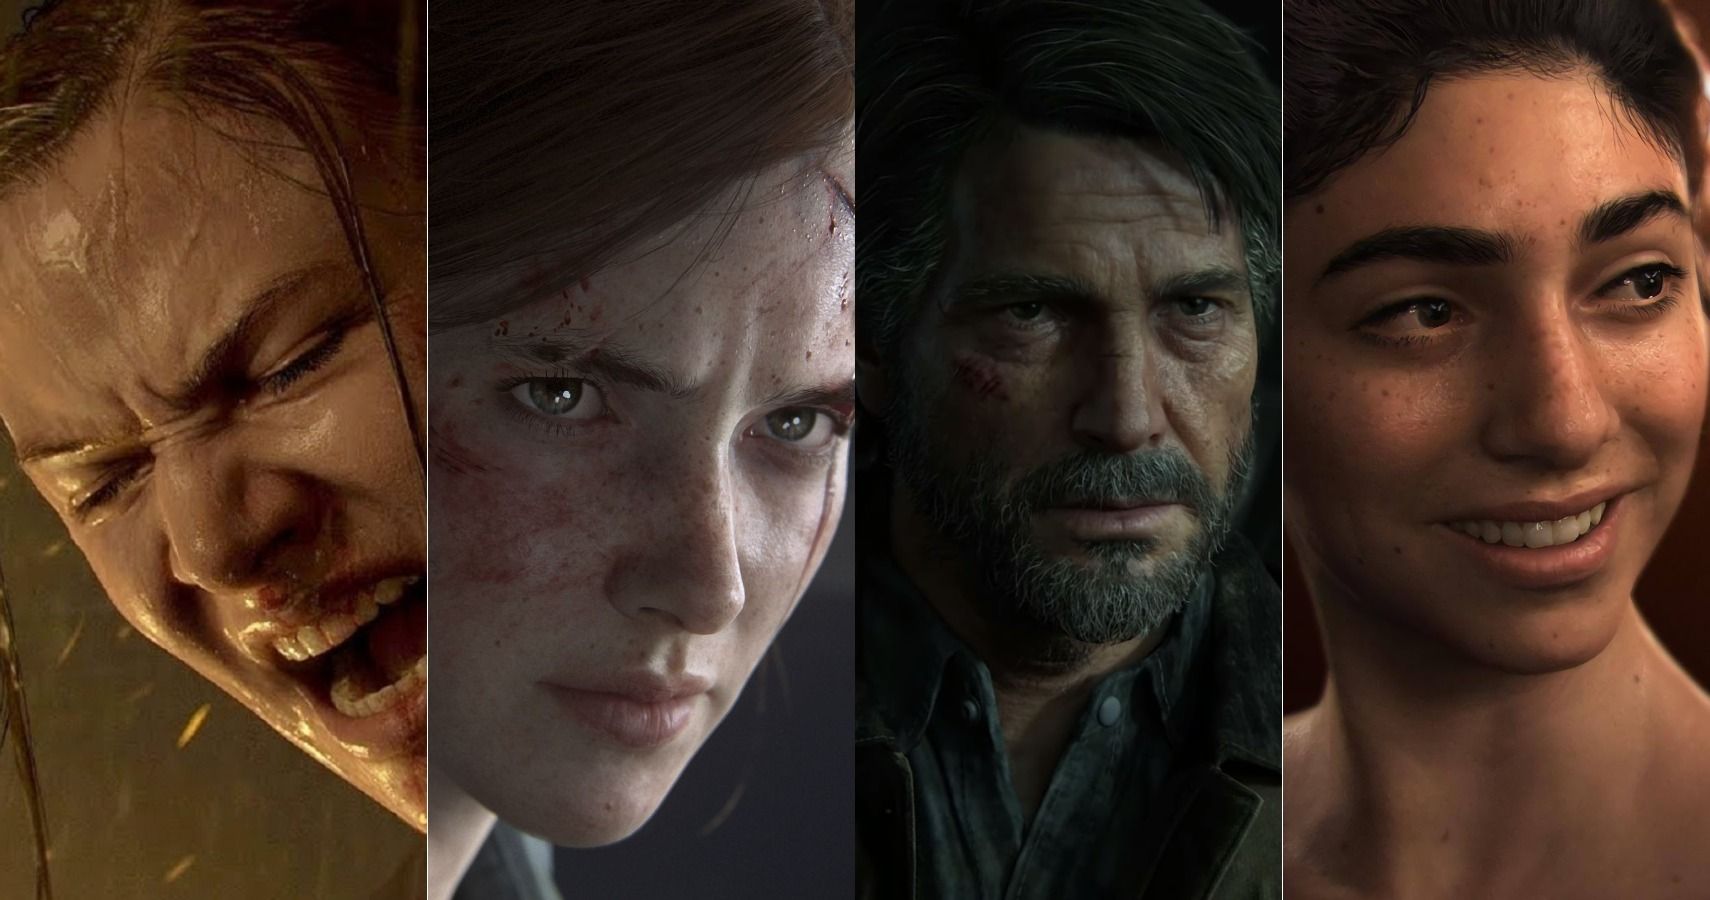 Ellie is the lead character in The Last of Us Part 2